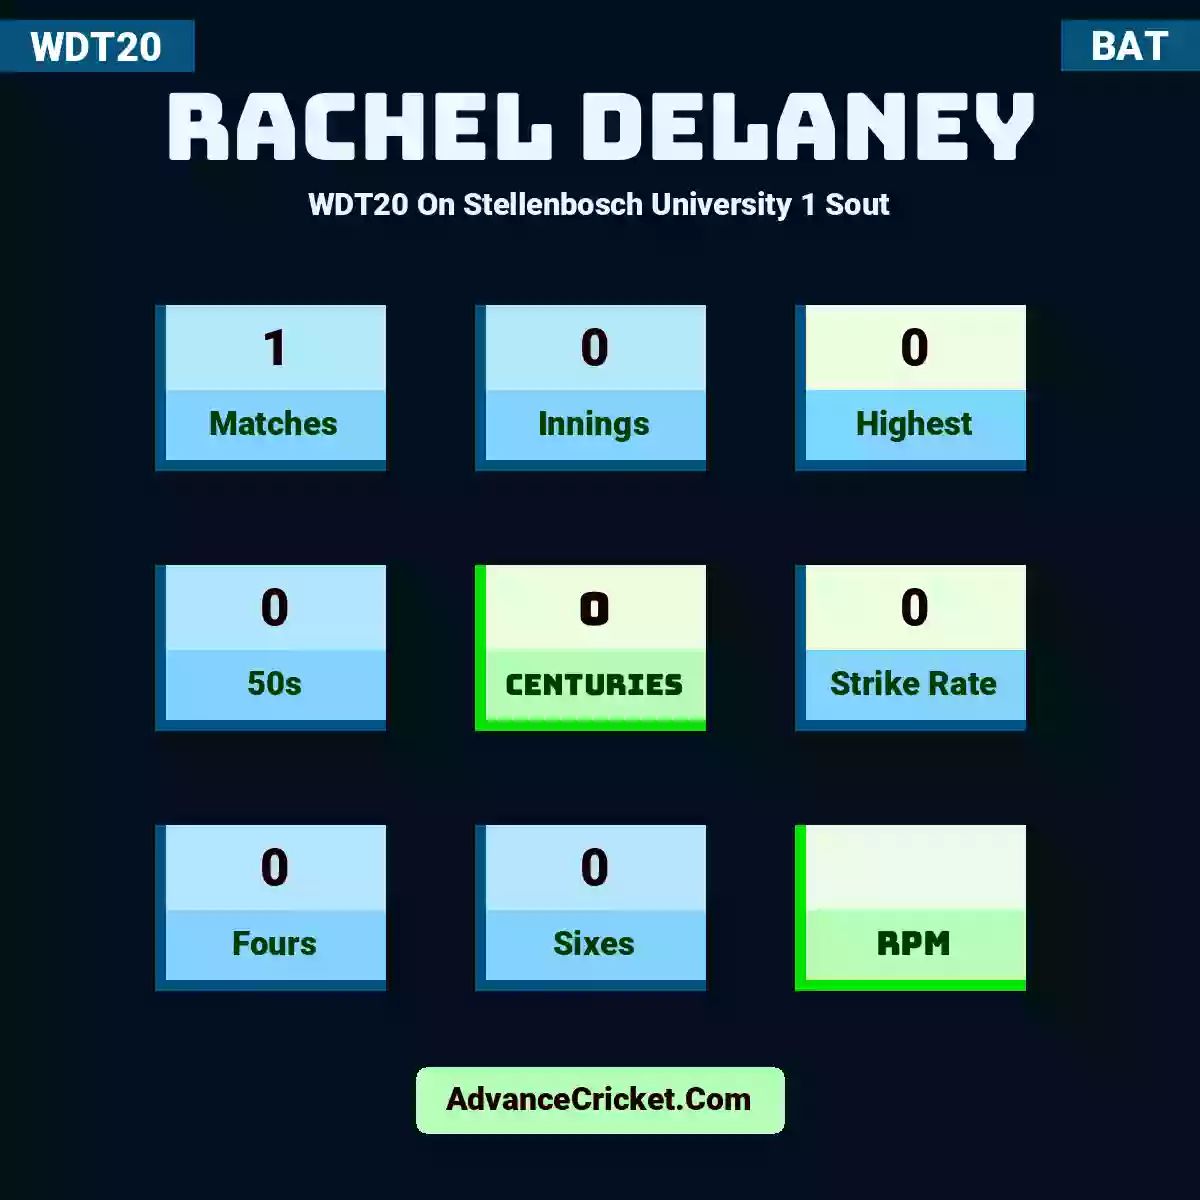 Rachel Delaney WDT20  On Stellenbosch University 1 Sout, Rachel Delaney played 1 matches, scored 0 runs as highest, 0 half-centuries, and 0 centuries, with a strike rate of 0. R.Delaney hit 0 fours and 0 sixes.